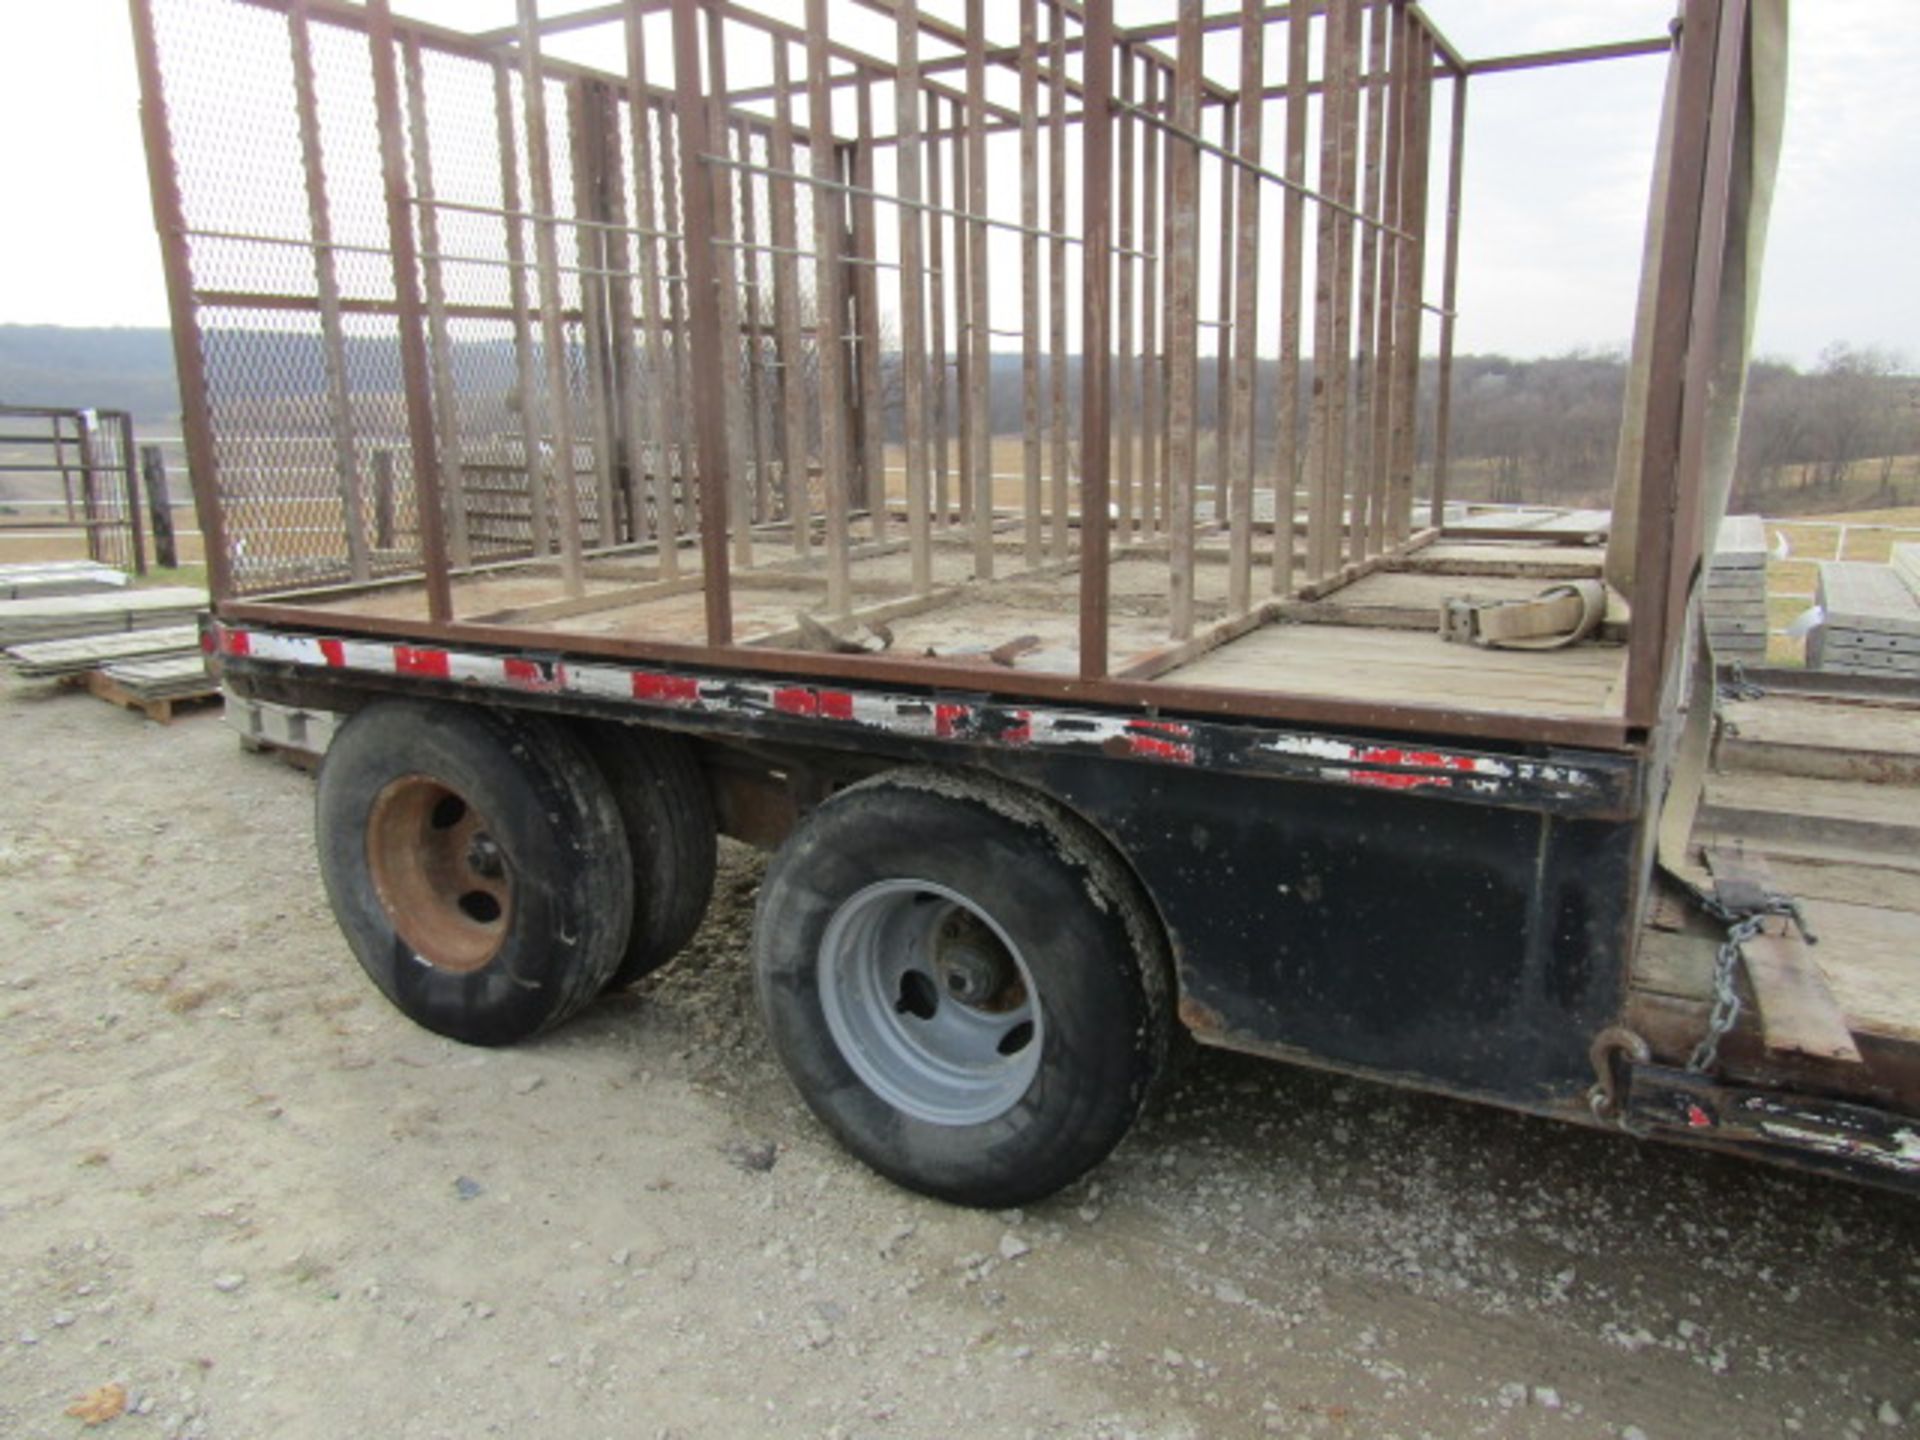 2004 B-B Gooseneck Trailer, Tandem Axle, 18' 8" x 9' 6" Well, 8' 7" Top Deck, Located in - Image 4 of 9